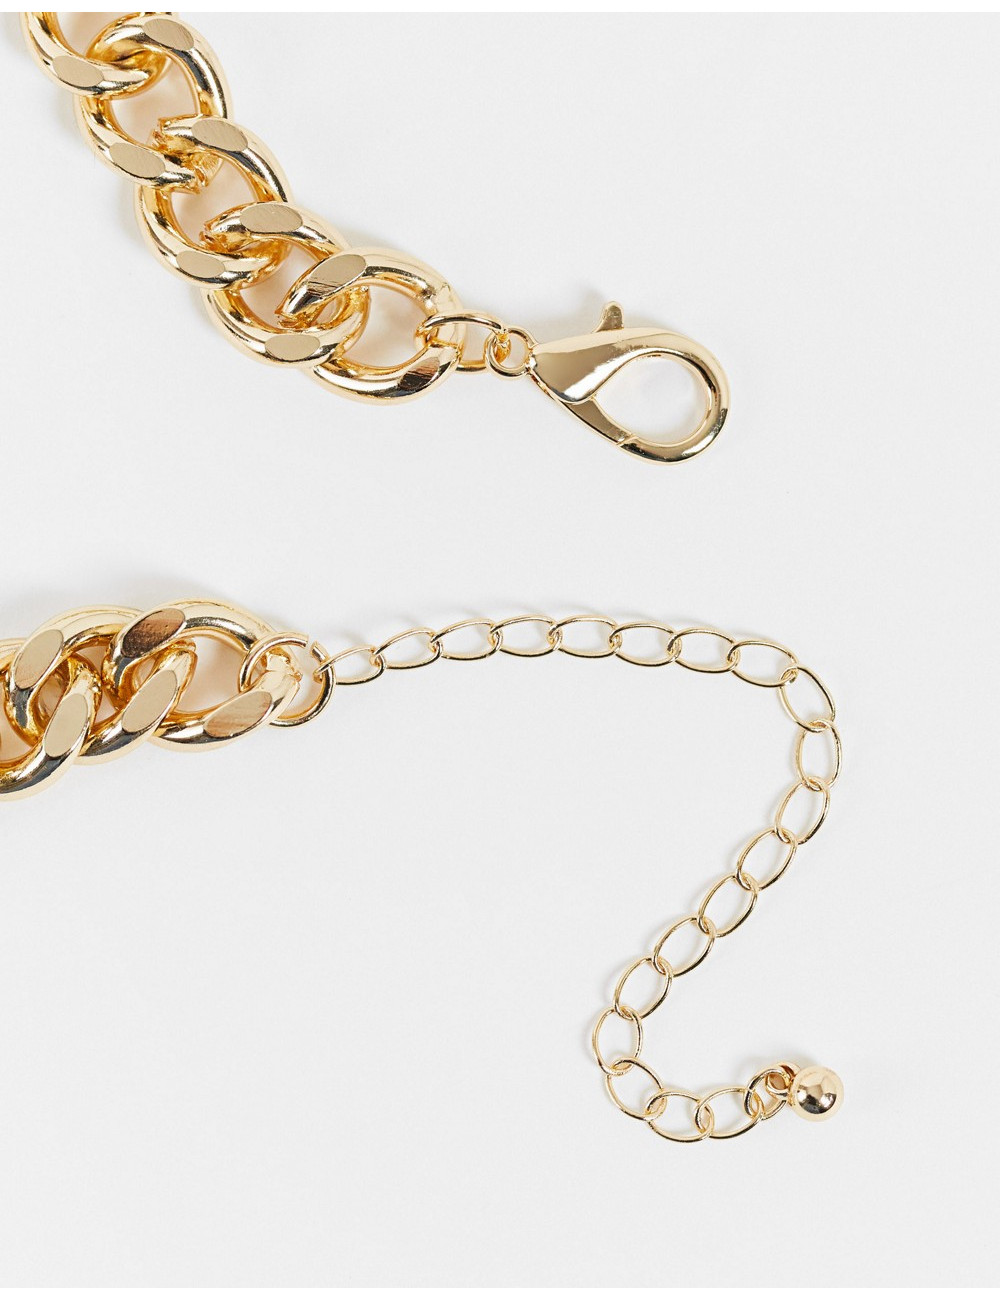 Topshop baby choker in gold